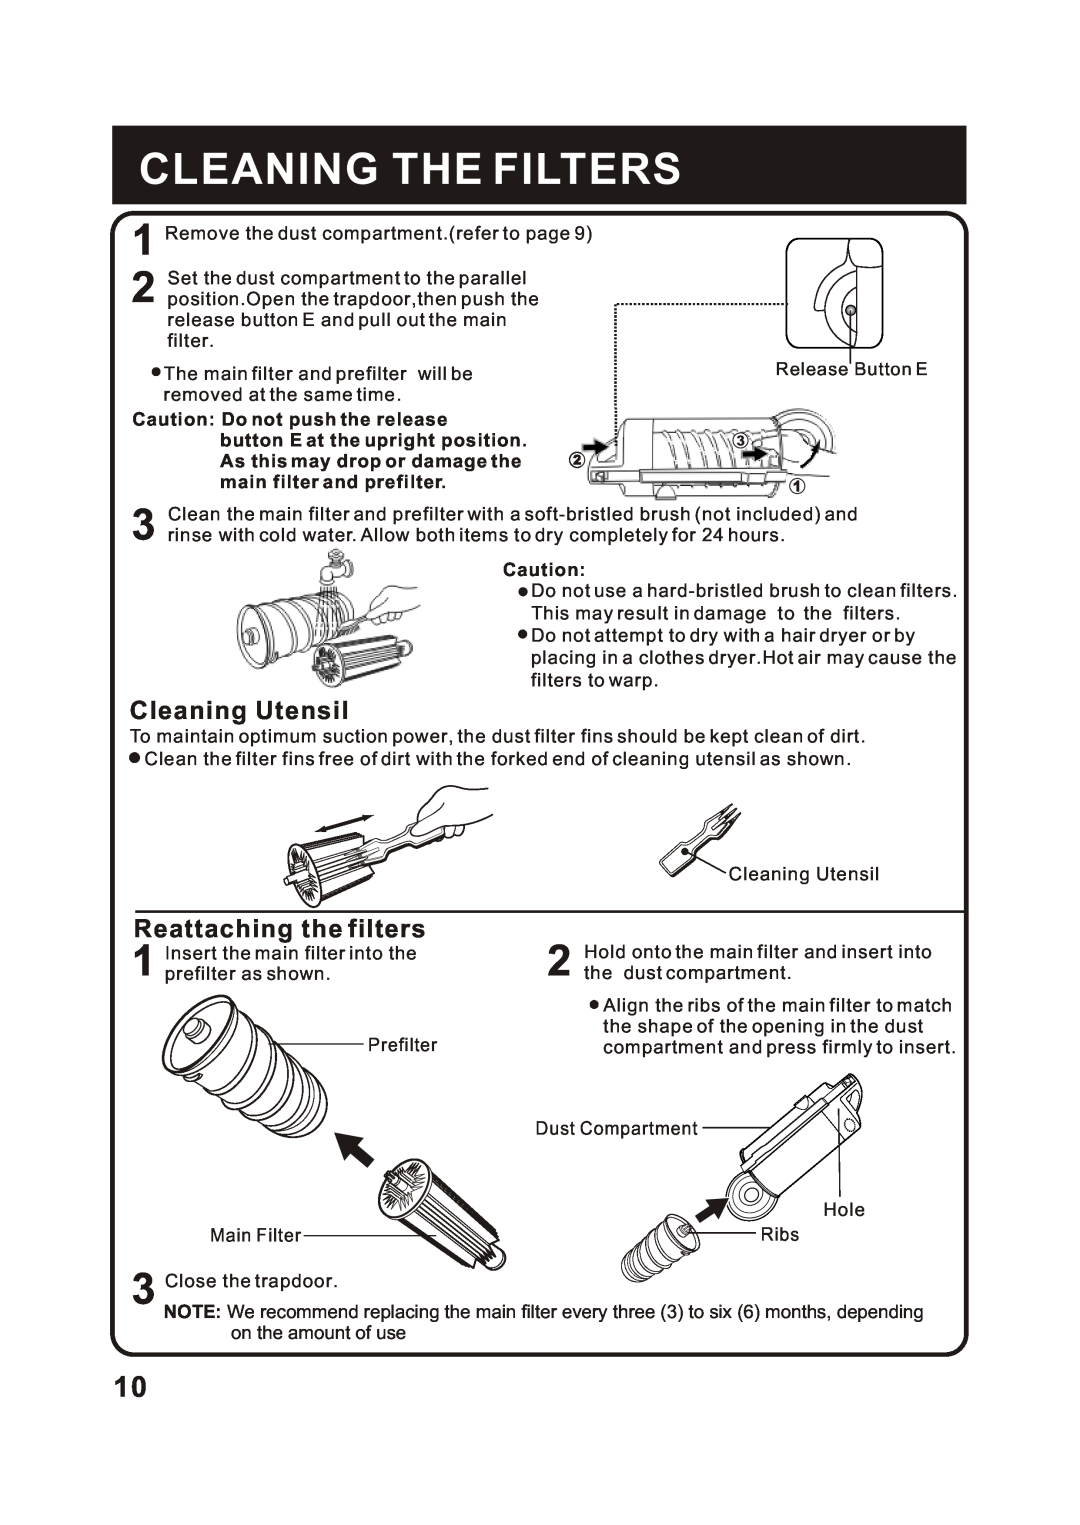 Fantom Vacuum FM741B instruction manual Cleaning The Filters, Cleaning Utensil, Reattaching the filters 